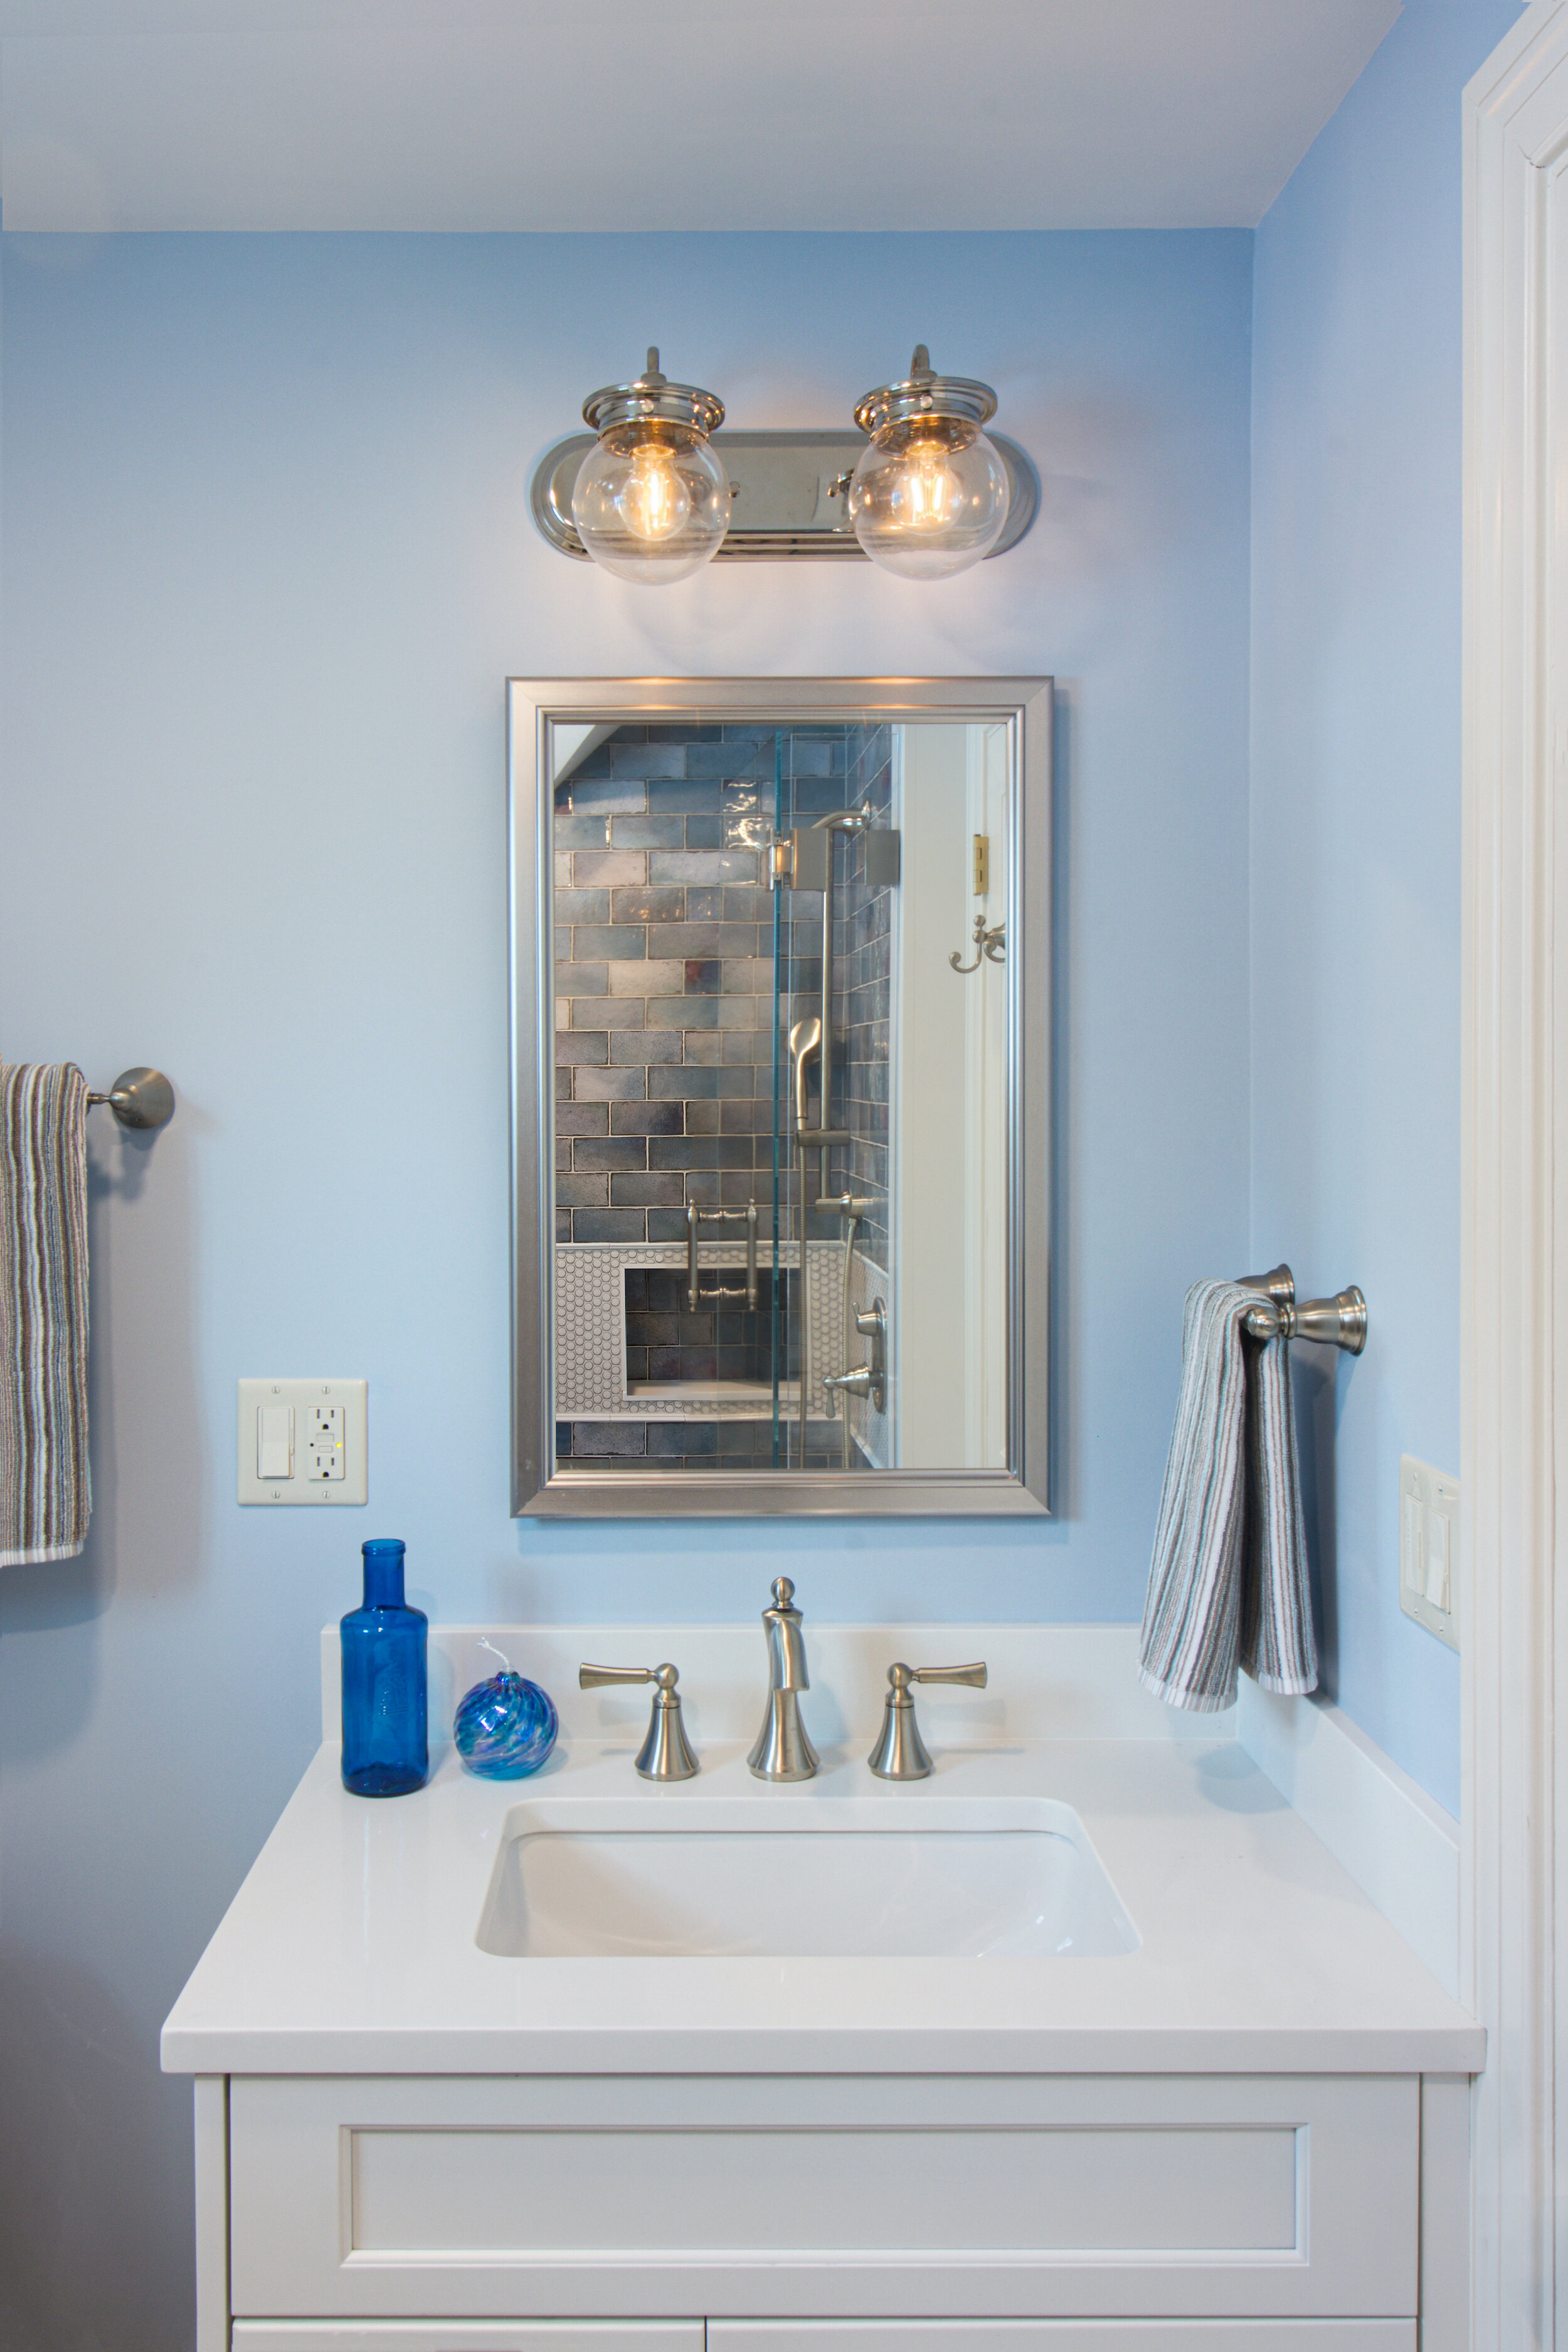 Brookline+Boys+Bath+Vanity+Shower+Reflected+KitchenVisions+Kitchen+Bath+Designers+Space+Planners.jpeg